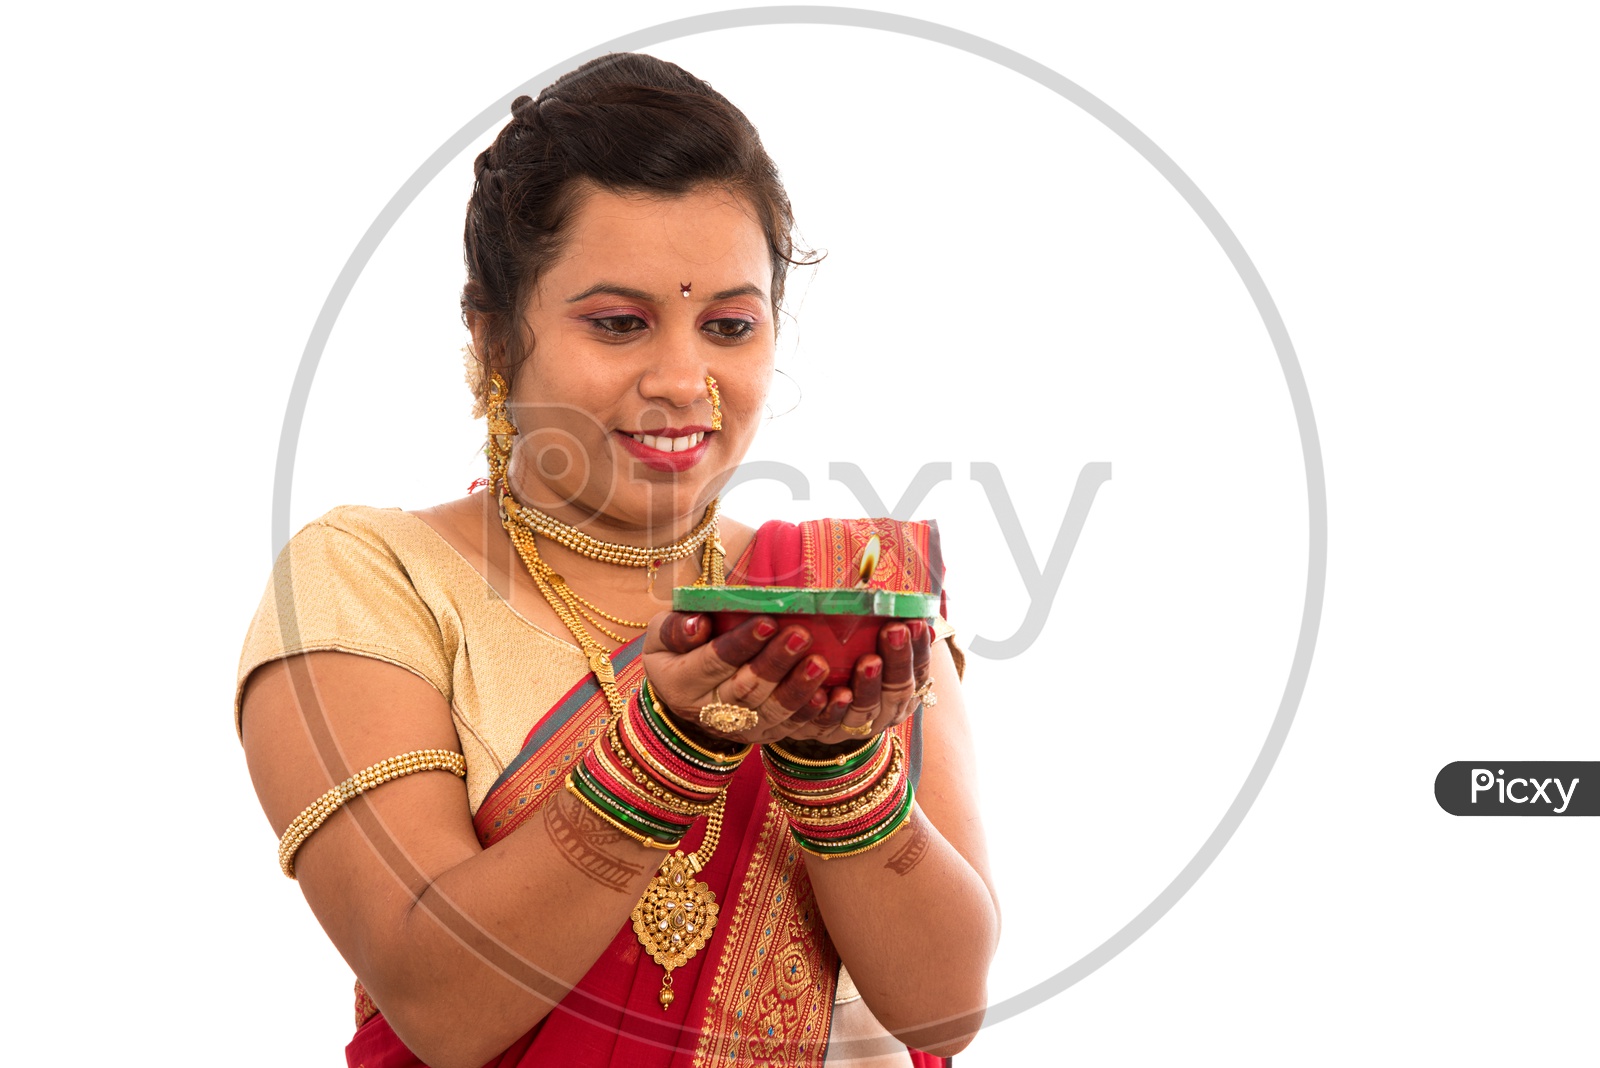 A Traditional Indian Woman  Holding Diwali Diya In Hand  On an Isolated White Background